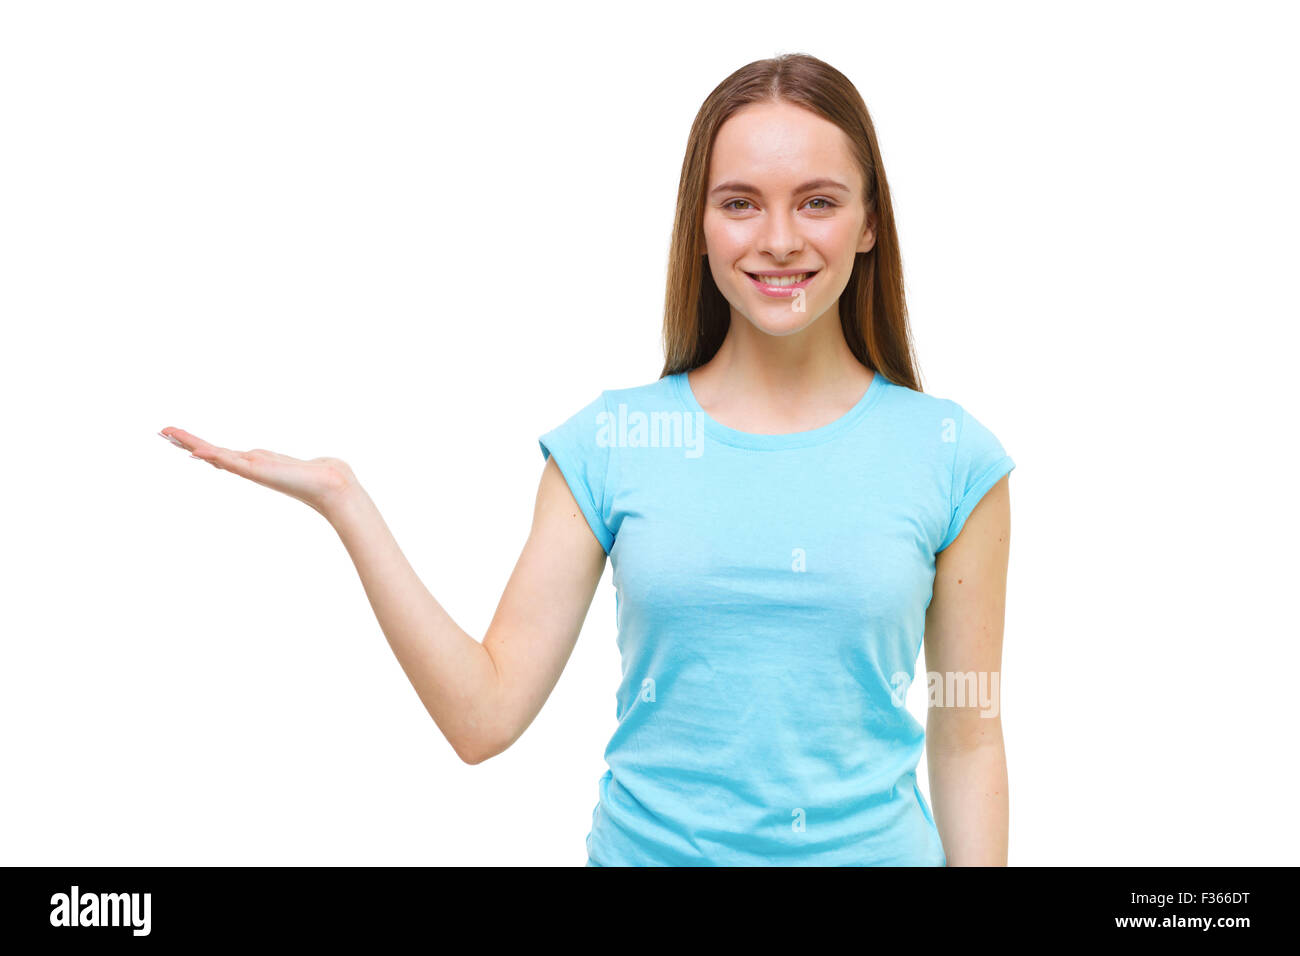 Young woman presenting something with open hand isolated on white background. Stock Photo